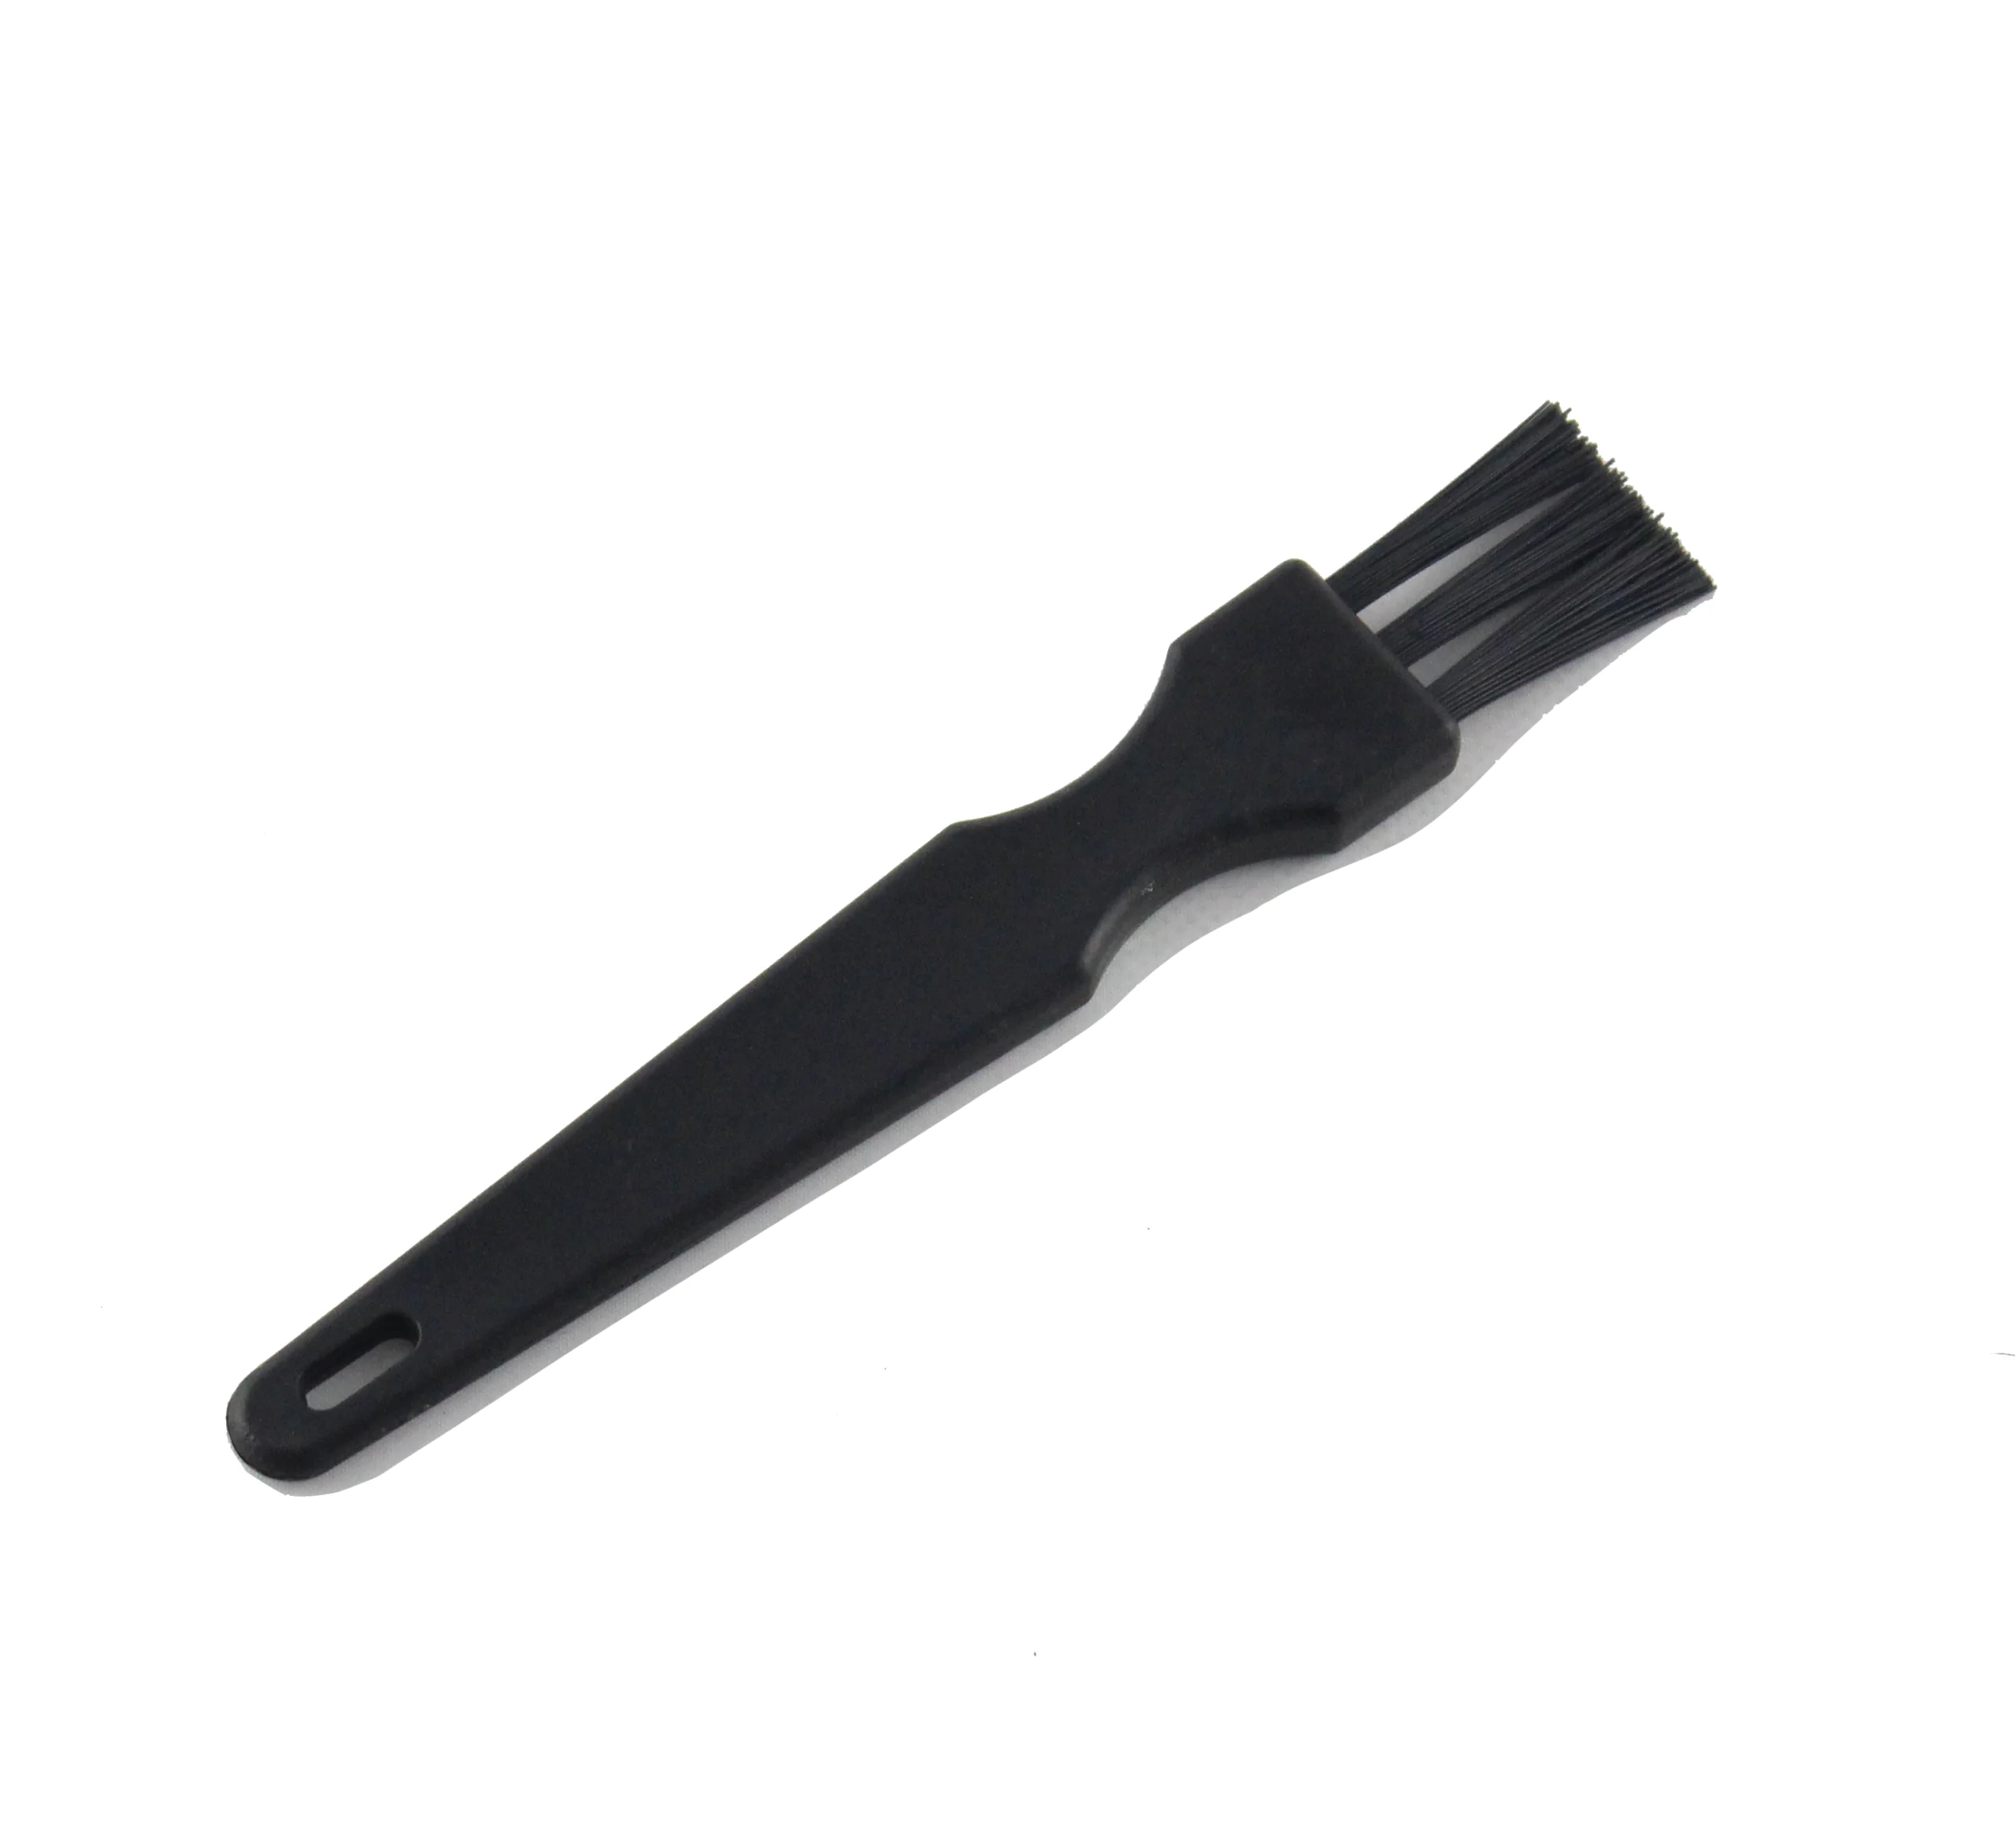 KB5111 Flat style ESD brush 151mm with bristle size 30 x 20mm from Bondline Electronics Ltd.